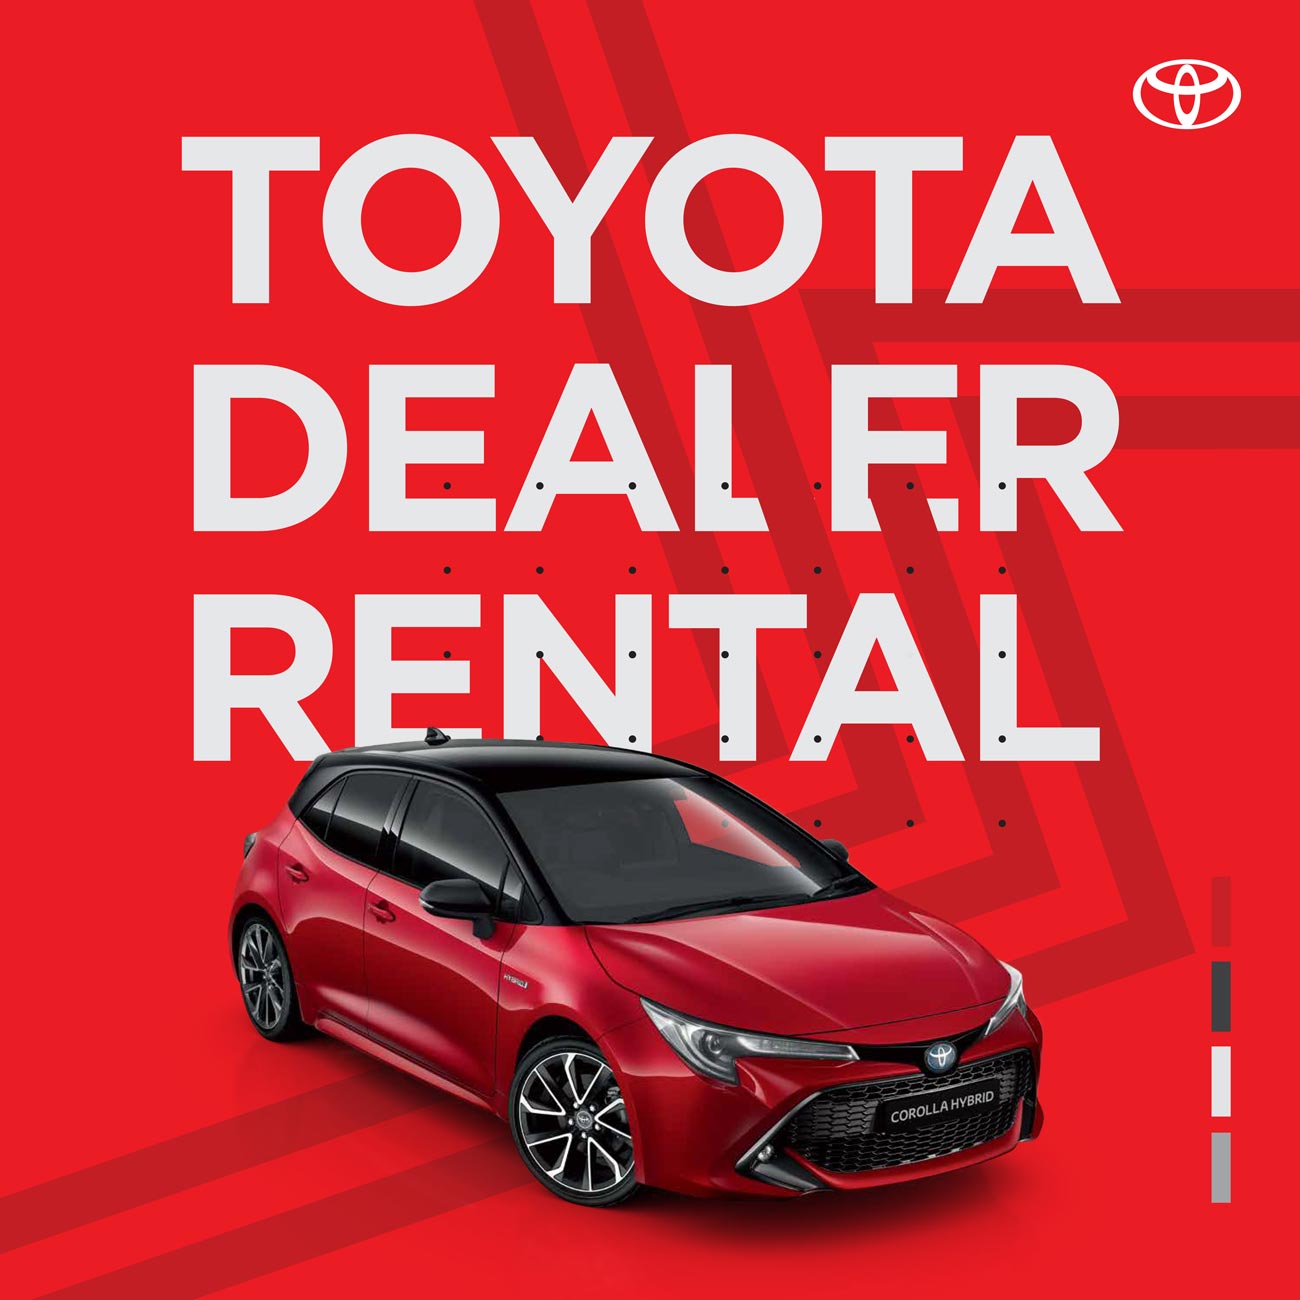 Example branded social media post for Toyota Dealer Rental, displaying red car and logo